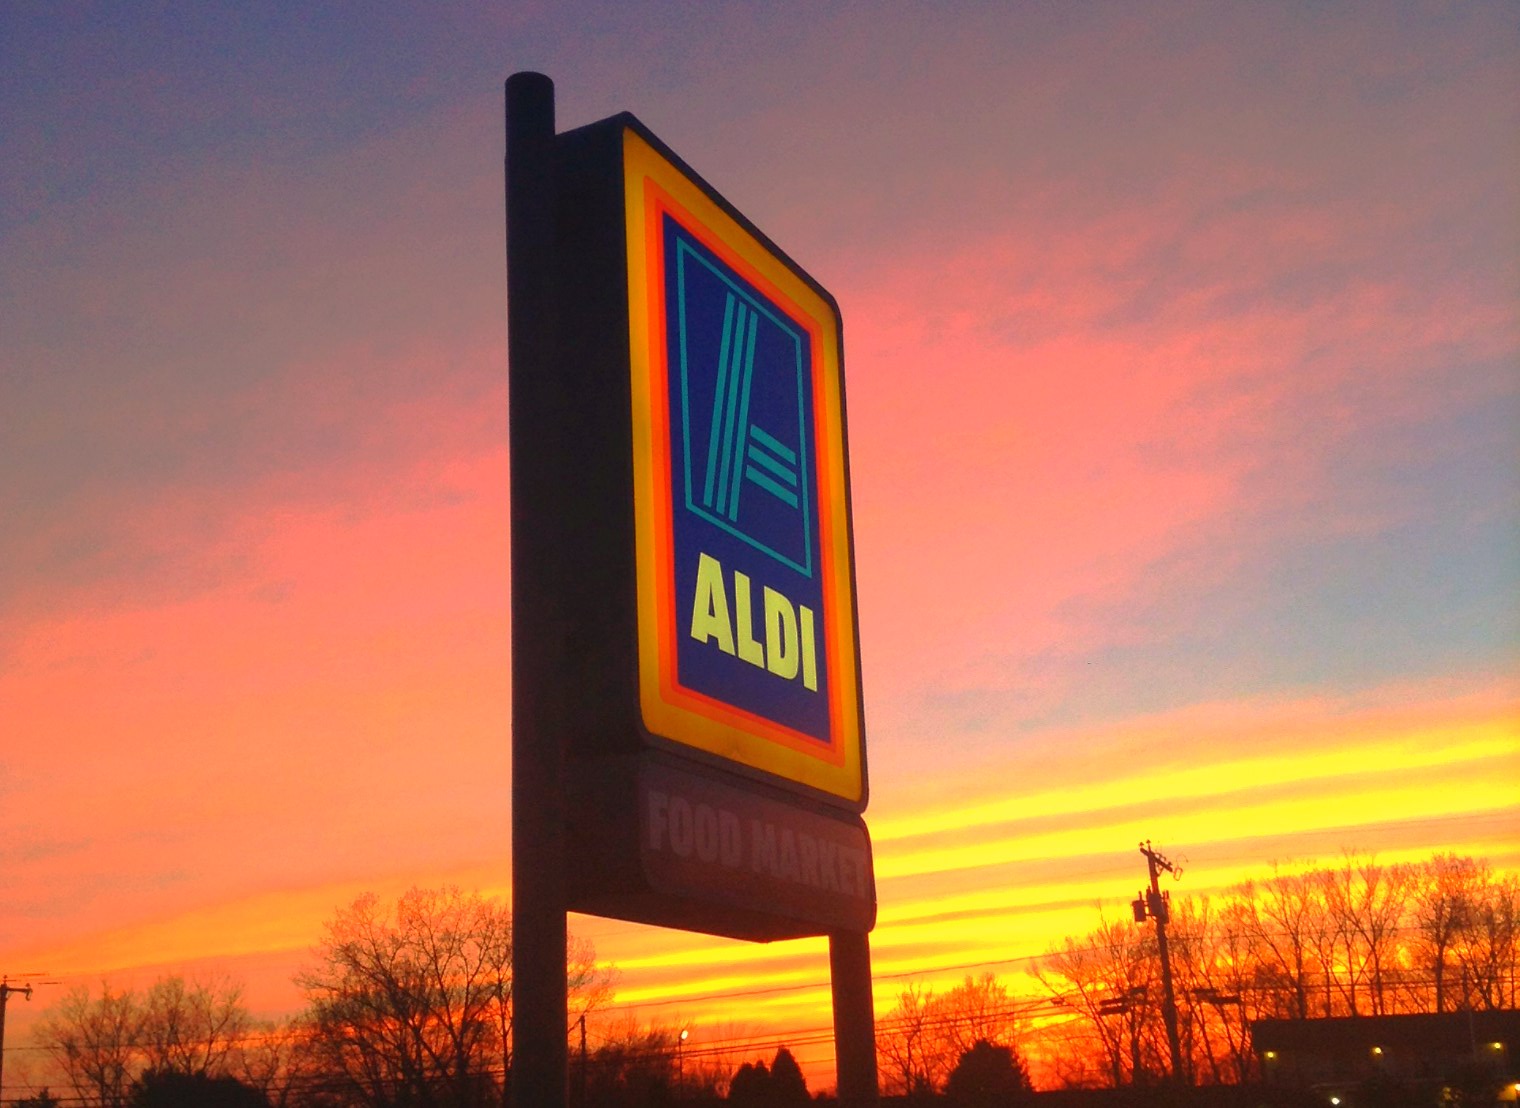 Discount Supermarket Chain Aldi Prepping To Take On Walmart & Others In U.S.